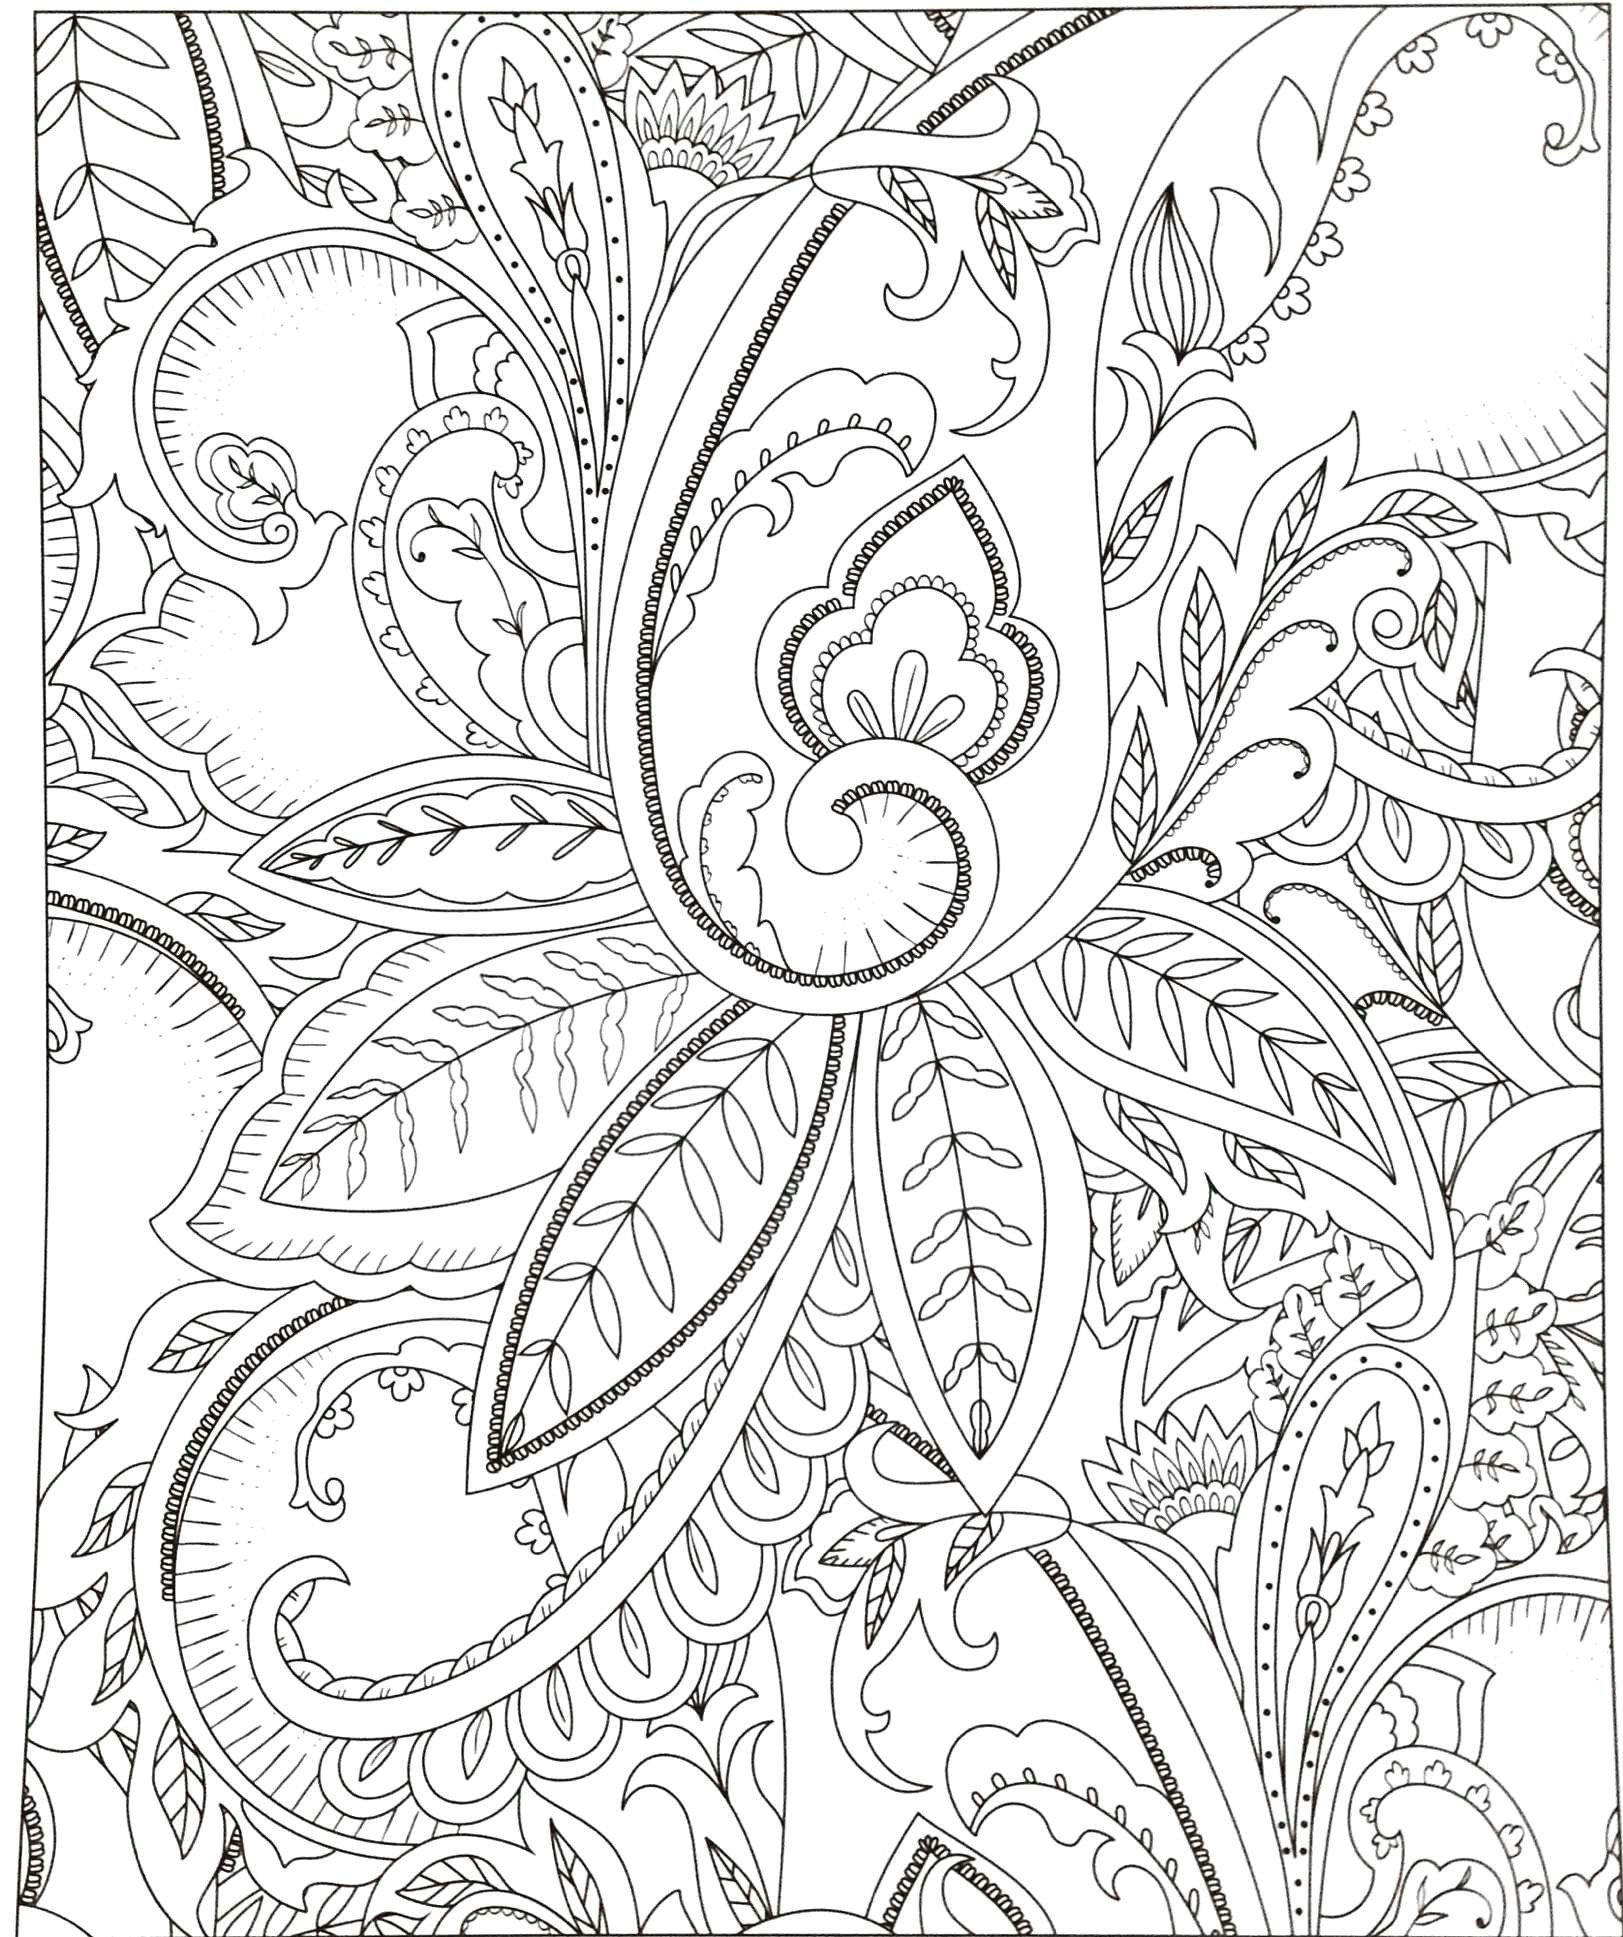 Drawing Flowers In Color Easy to Draw Instruments Home Coloring Pages Best Color Sheet 0d